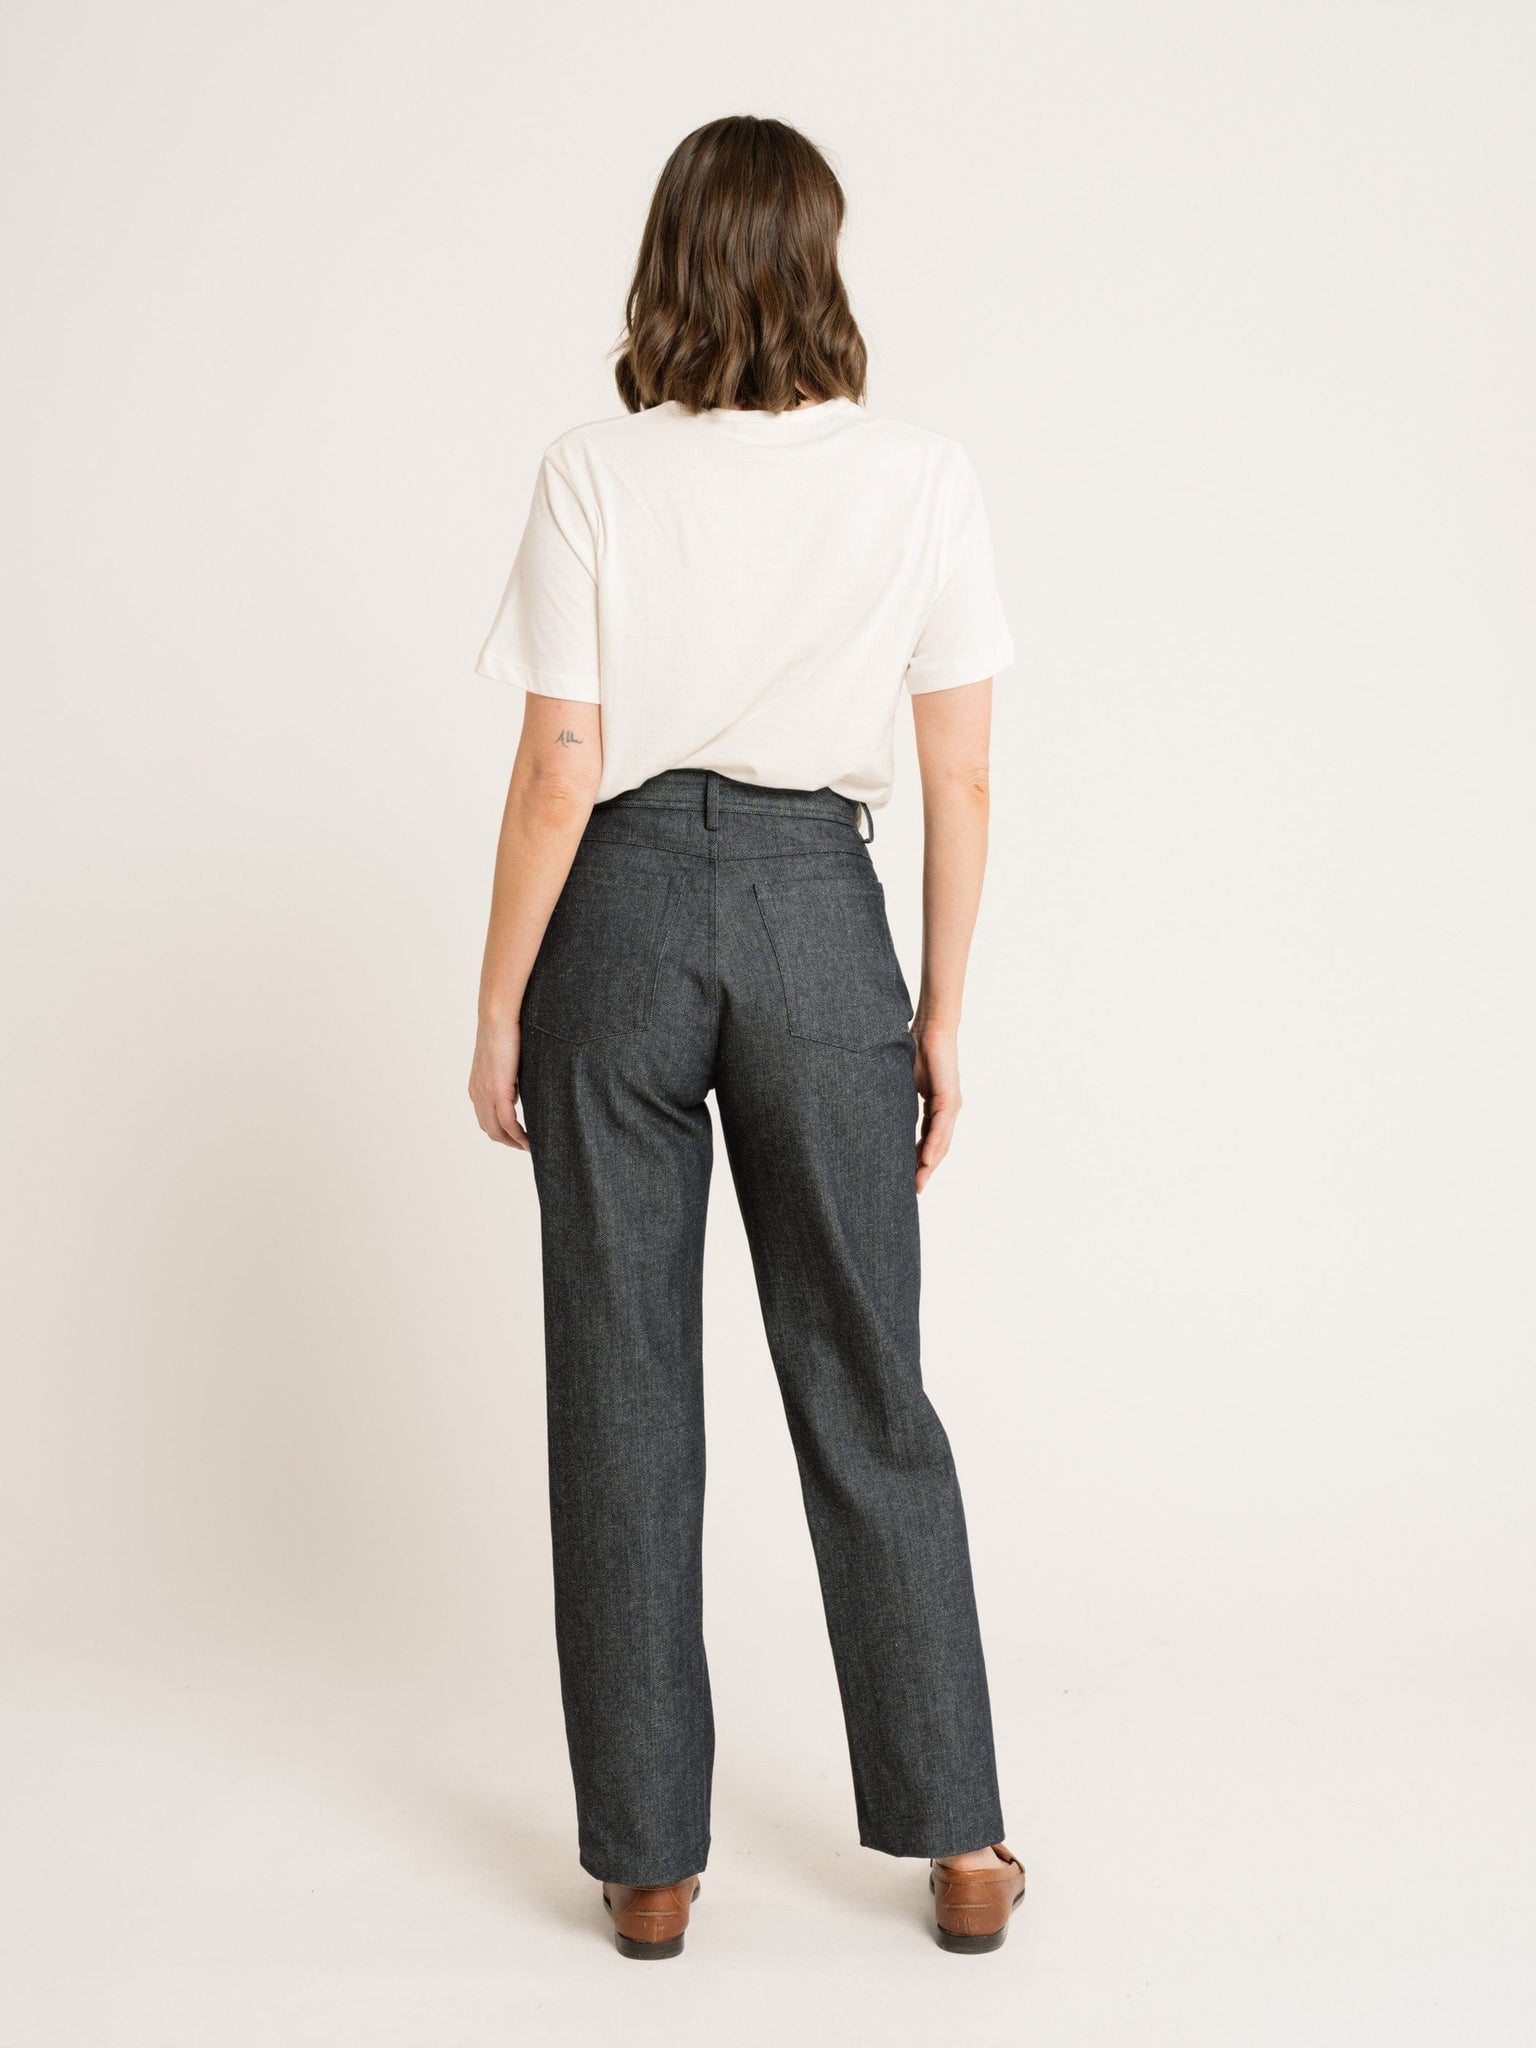 The woman is wearing a pair of Camp Pants - Vintage Denim - Samples made from organic cotton, perfect for machine wash.